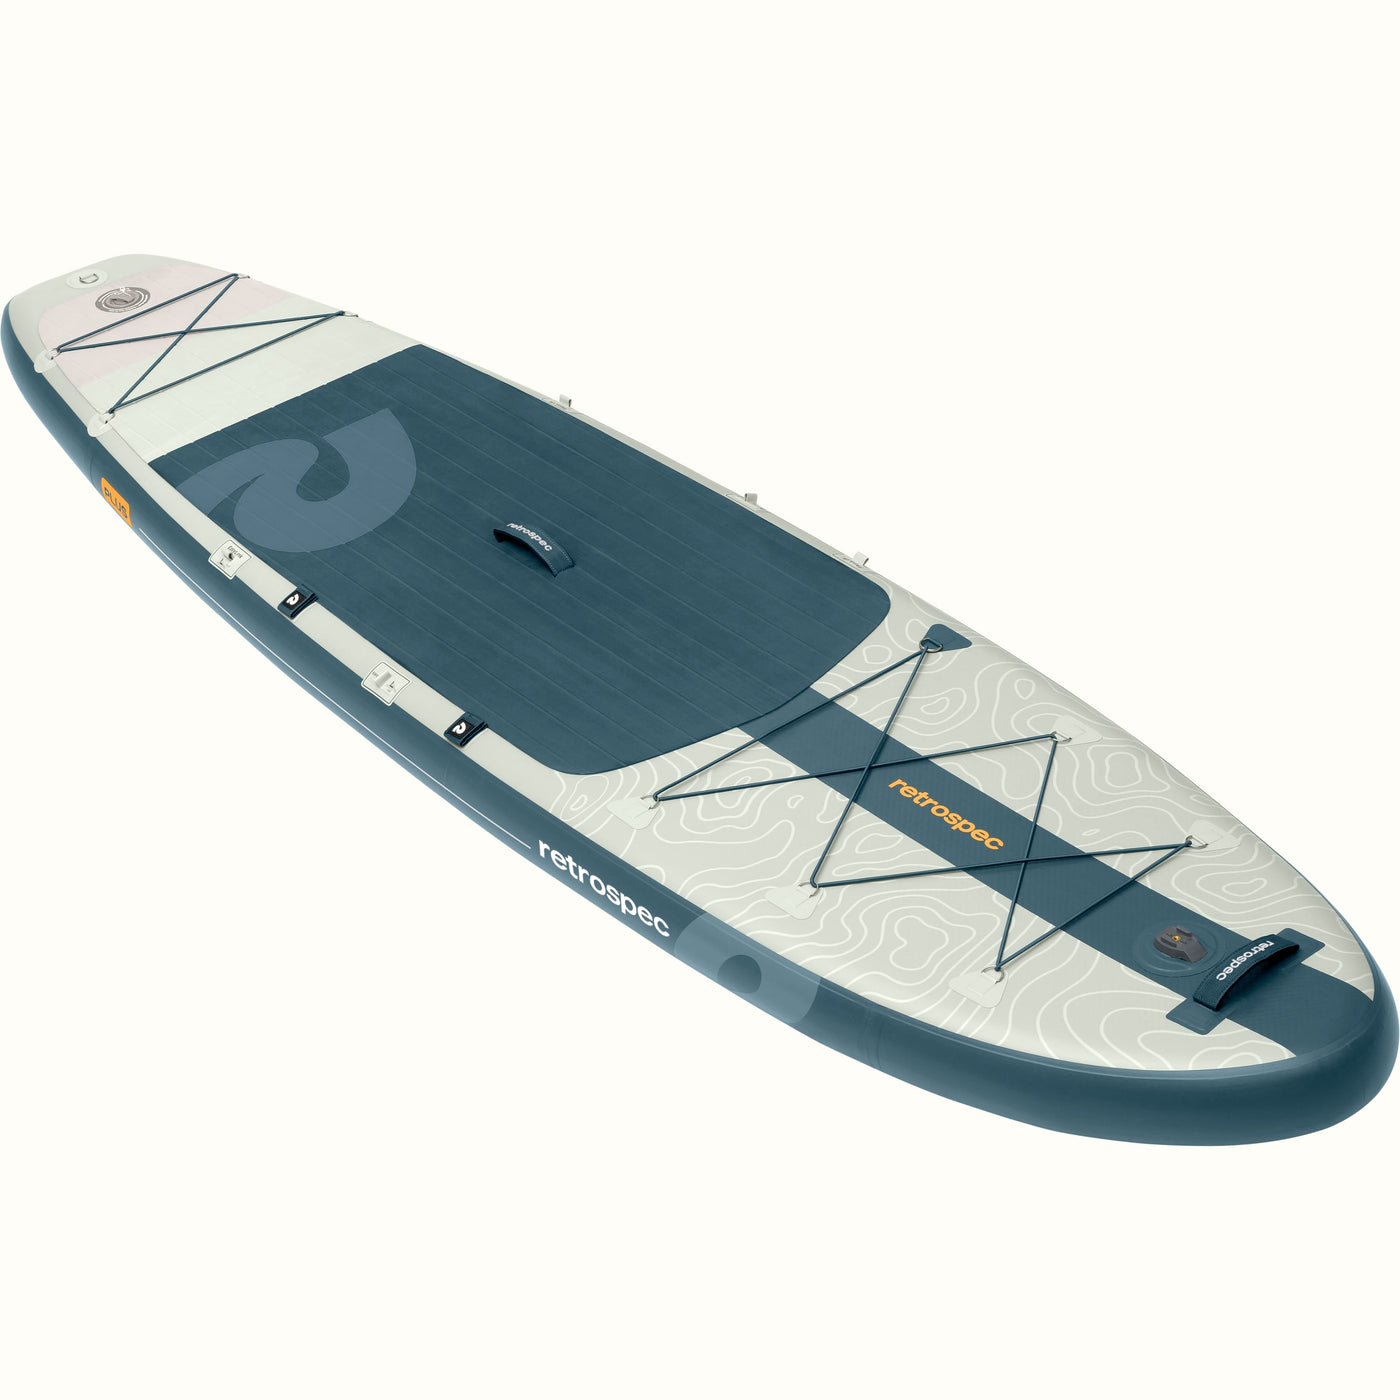 Weekender Plus 2 10' Inflatable Stand Up Paddle Board | River Rock